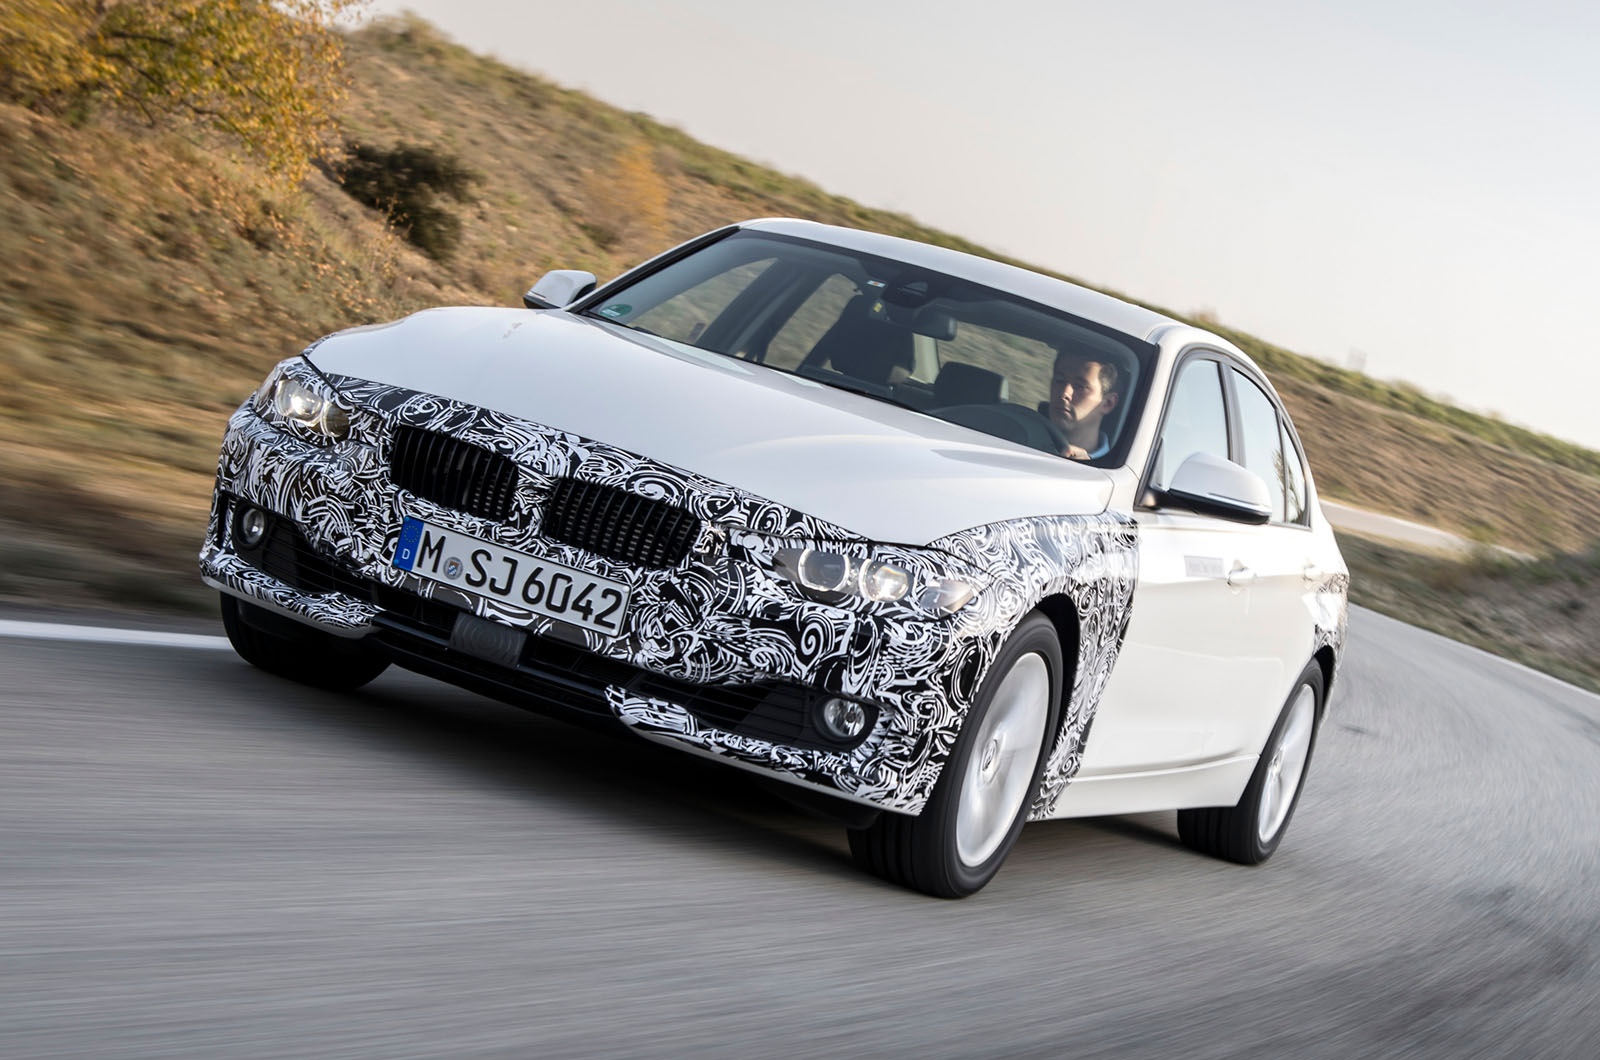 Production of BMW's new plug-in hybrid 3-series should start in 2016